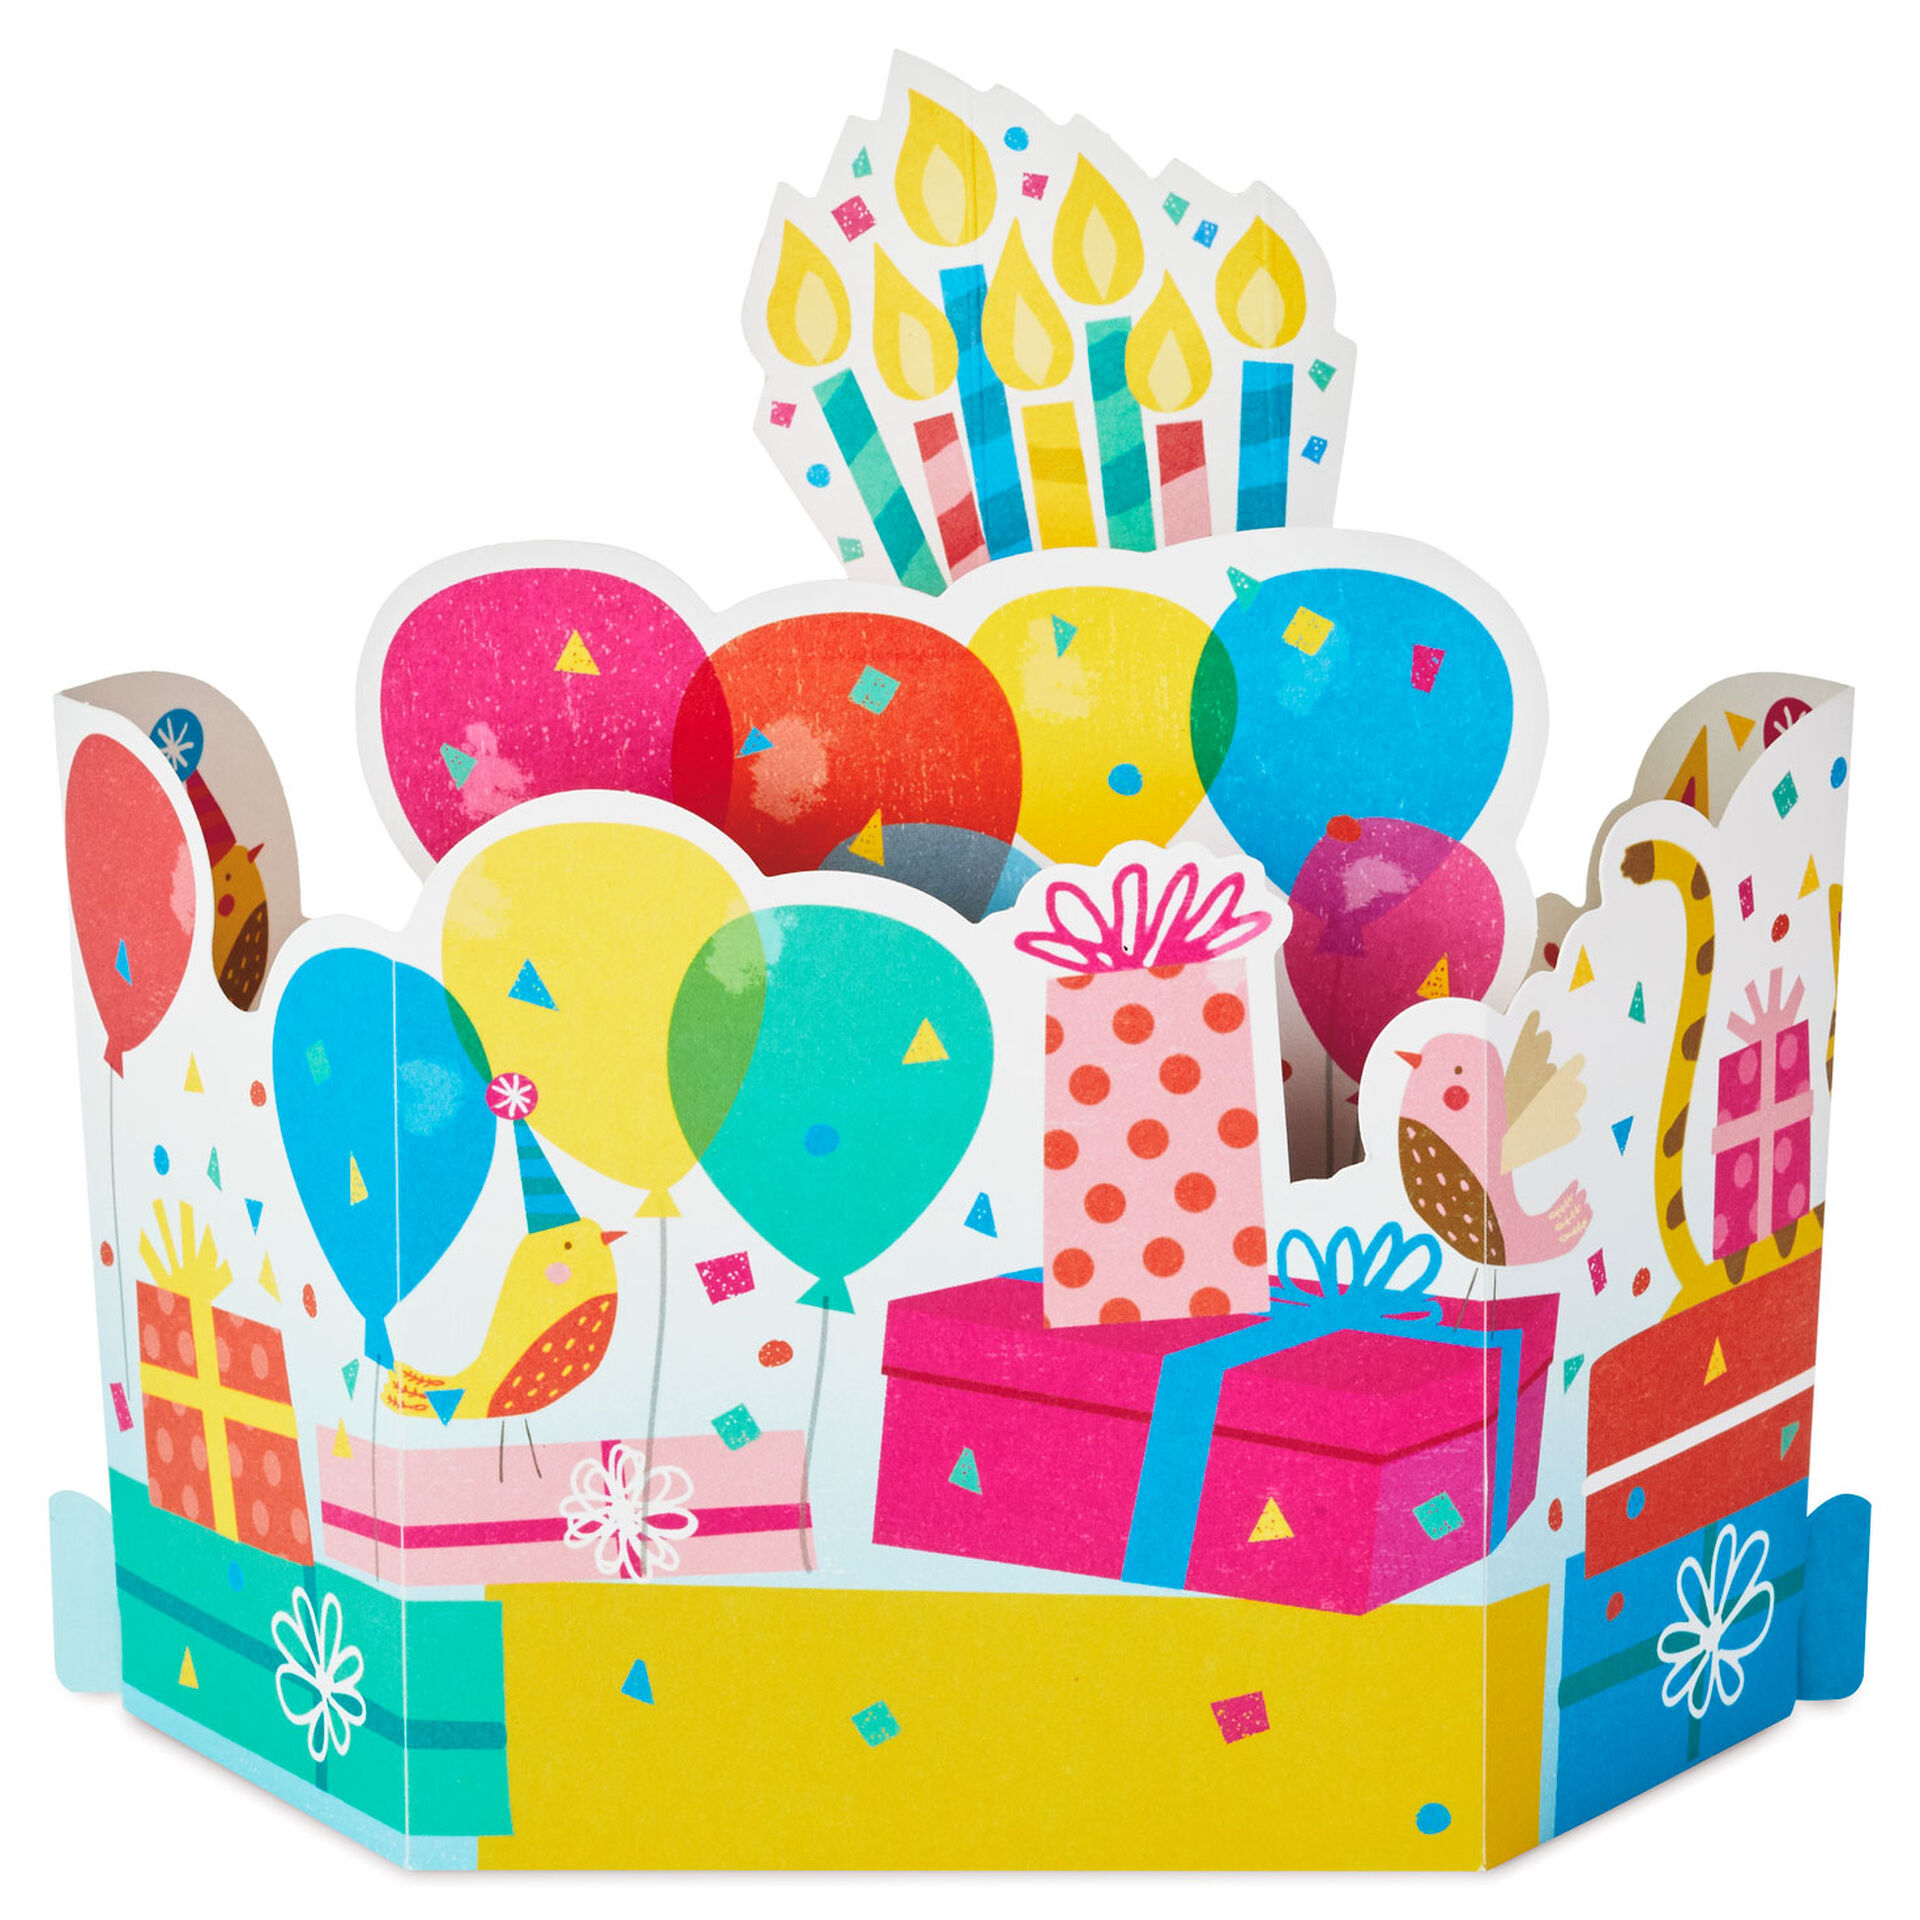 Slice of Happy Cake 3D Pop-Up Musical Birthday Card With Light ...